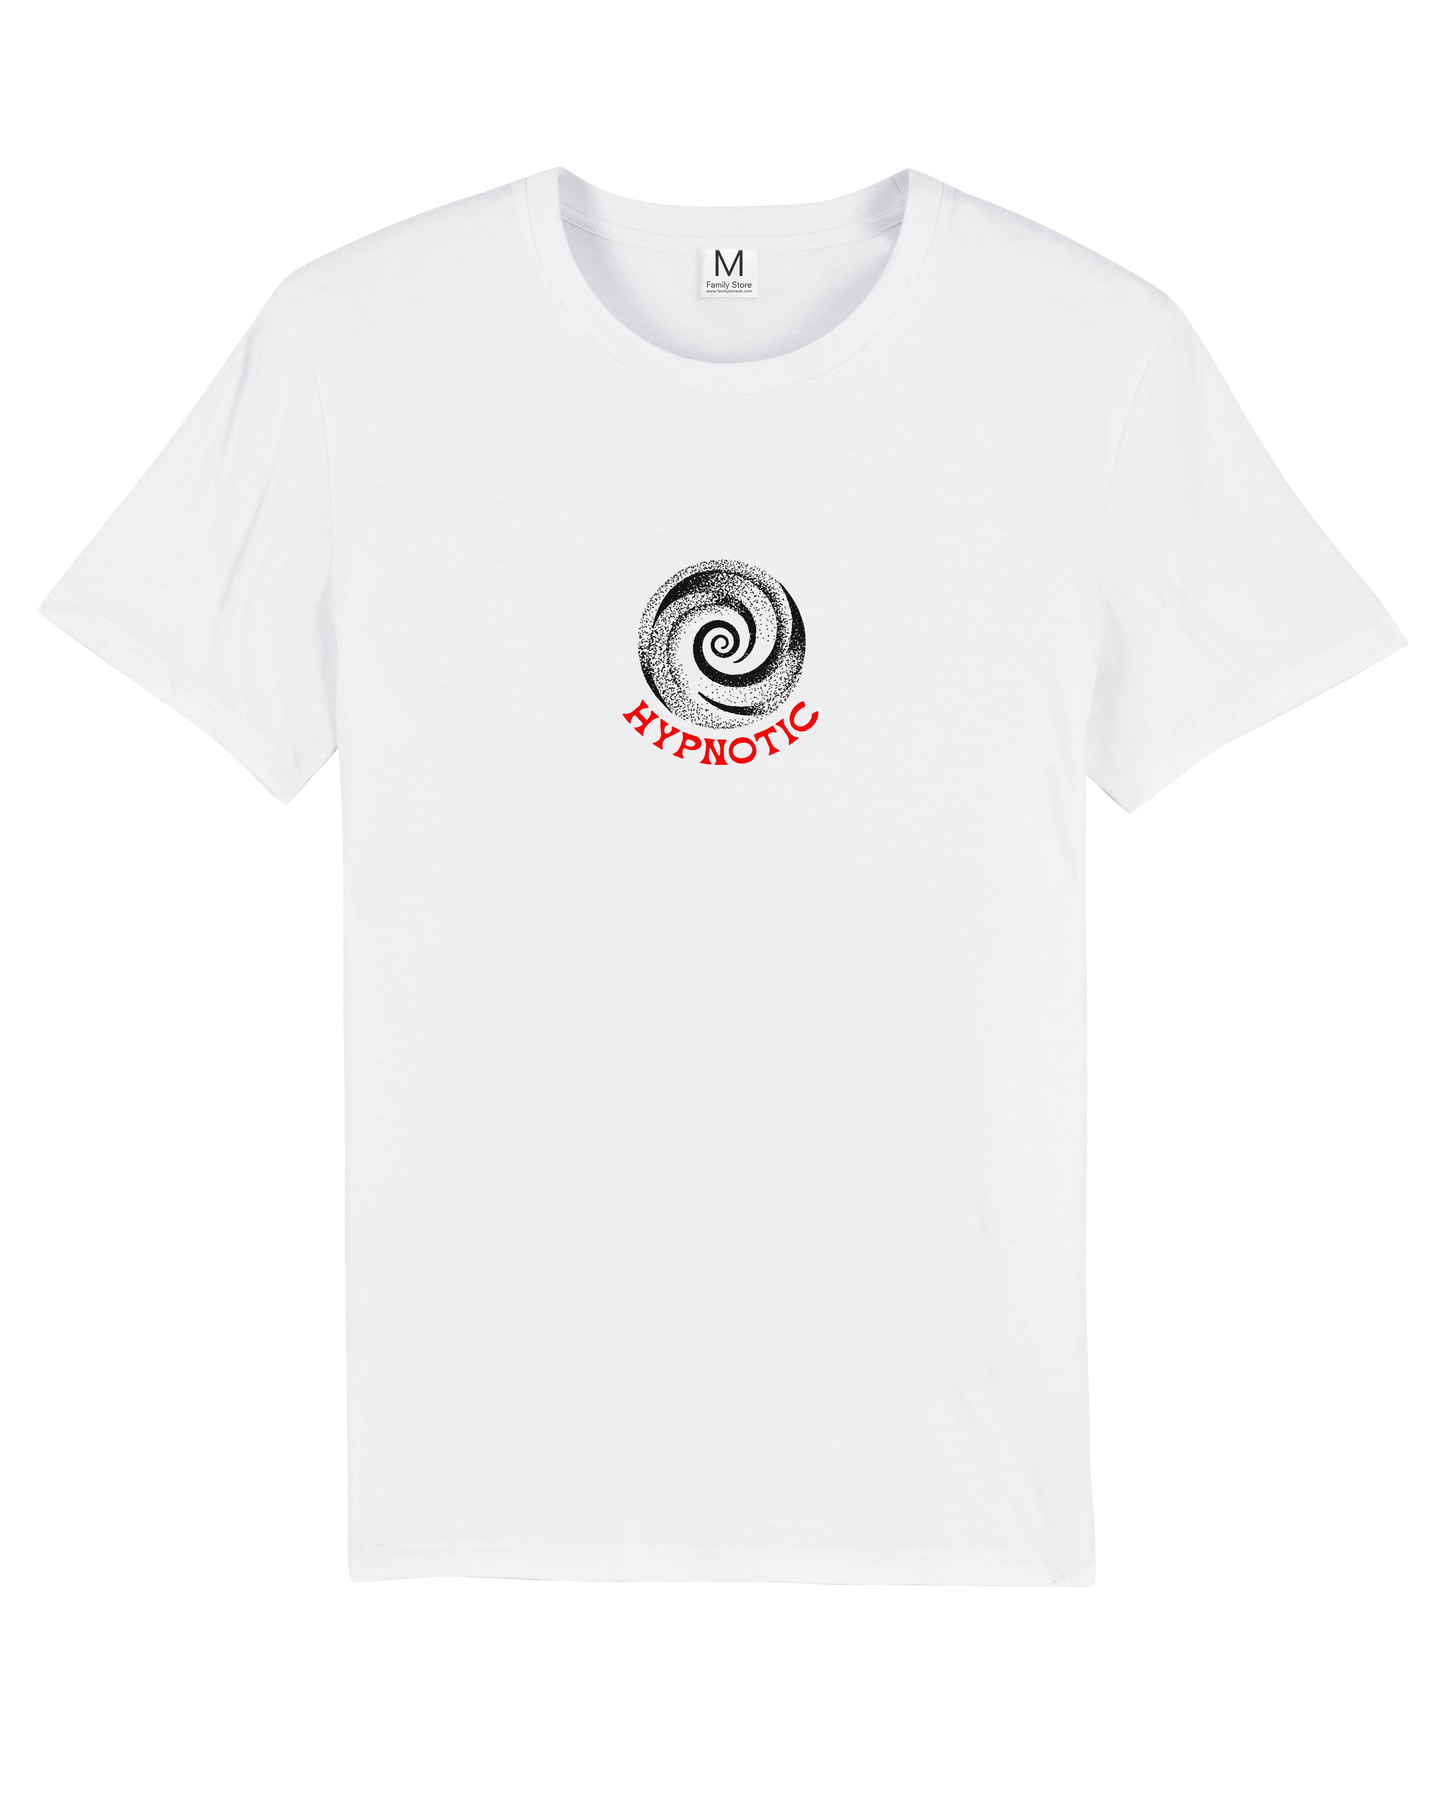 HYPNOTIC FACE White TEE by LAN TRUONG x FS